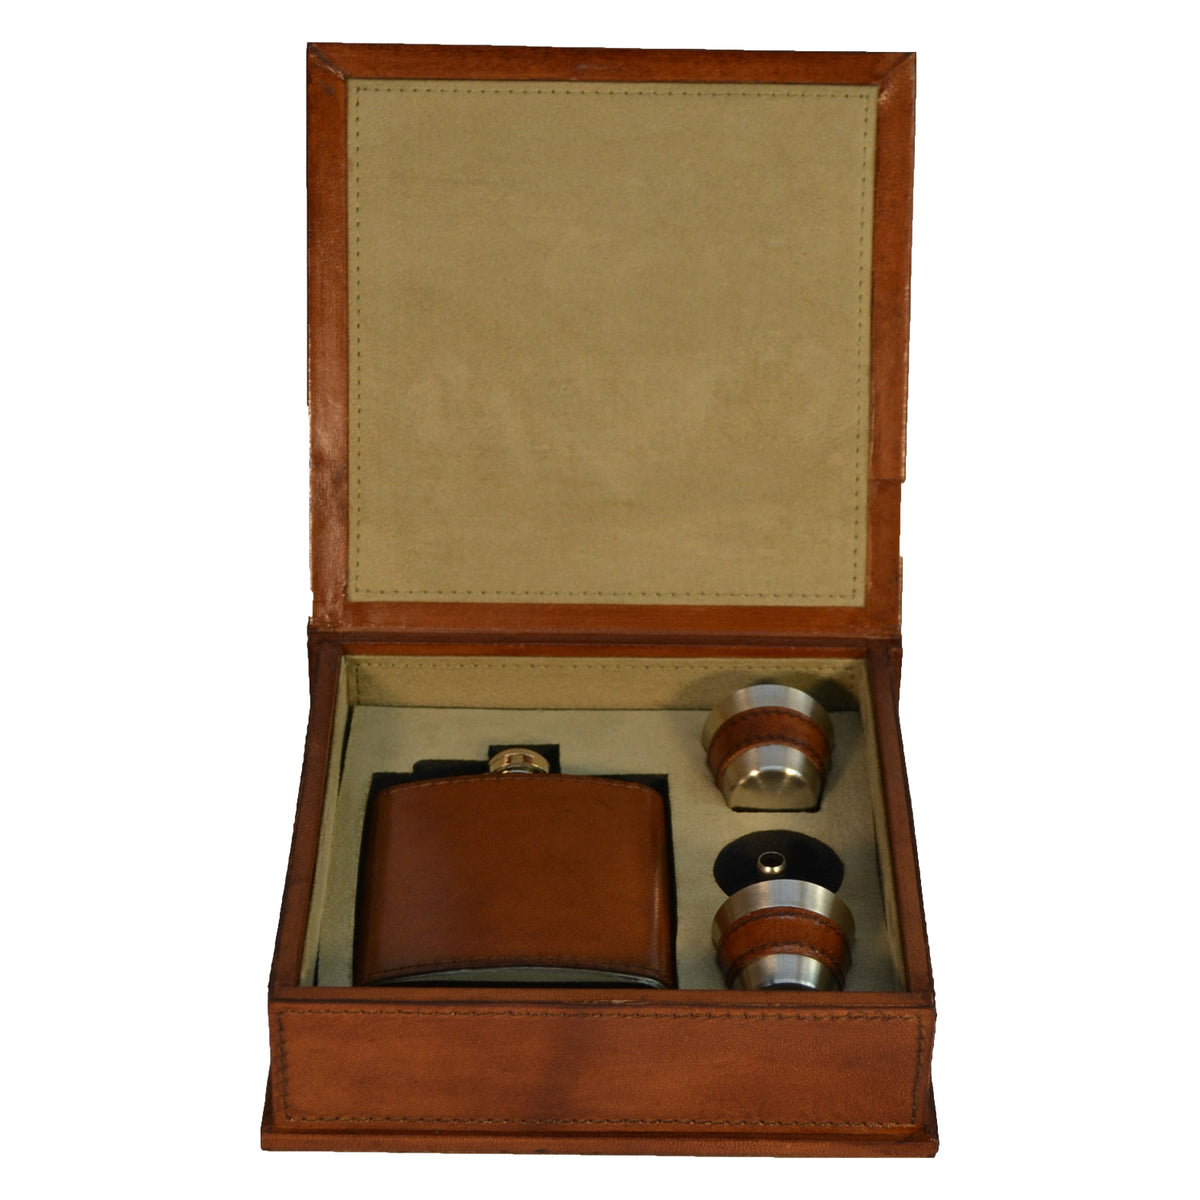 Sancho 177ml Hip Flask Box Set in Tan Leather - 4 Piece - Notbrand